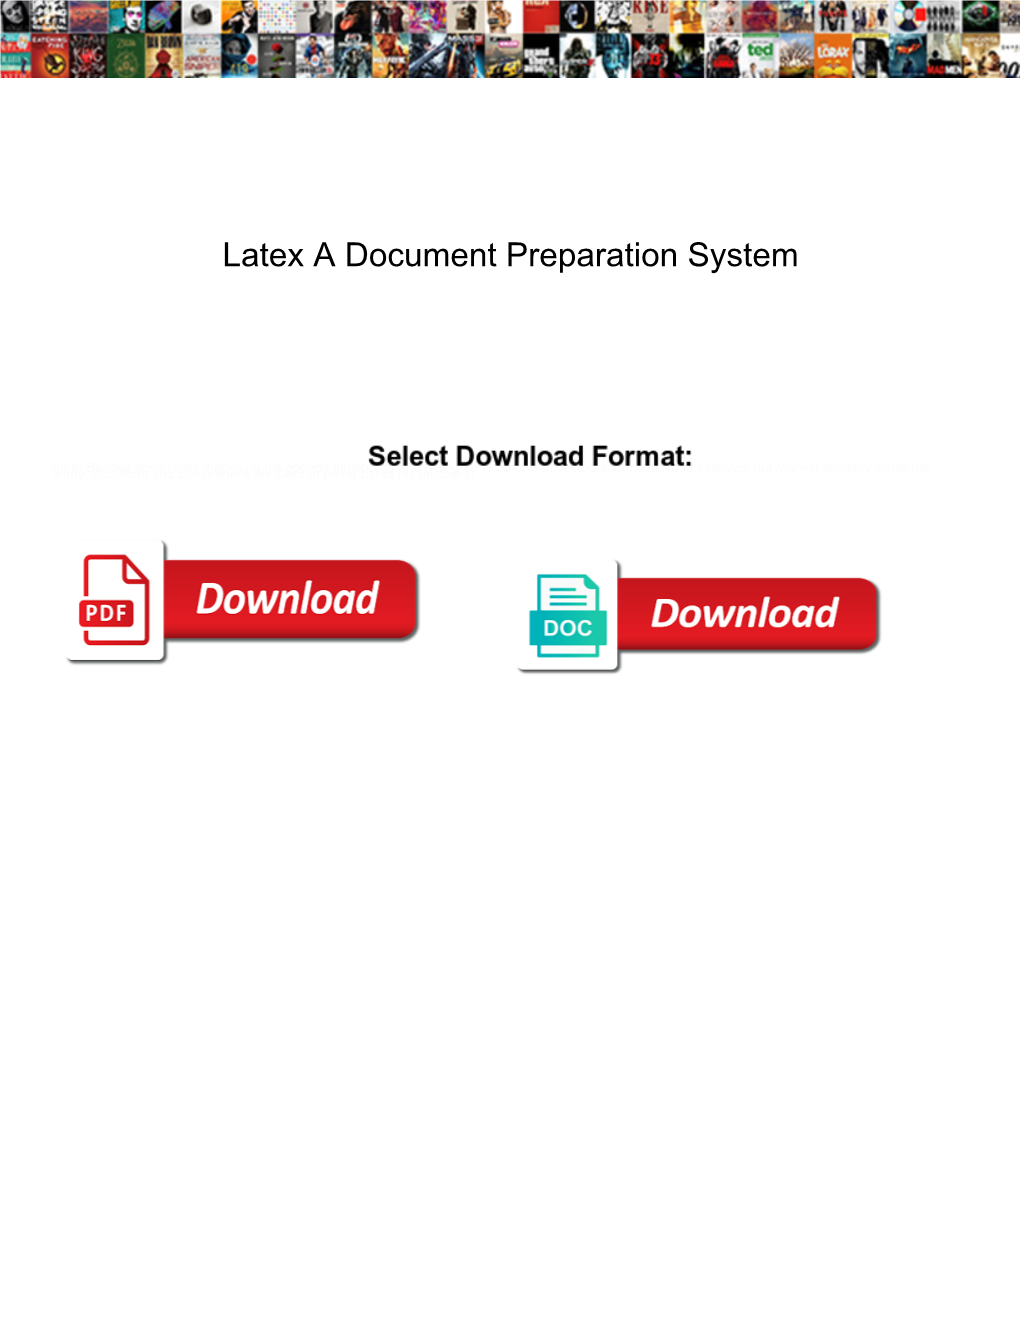 Latex a Document Preparation System